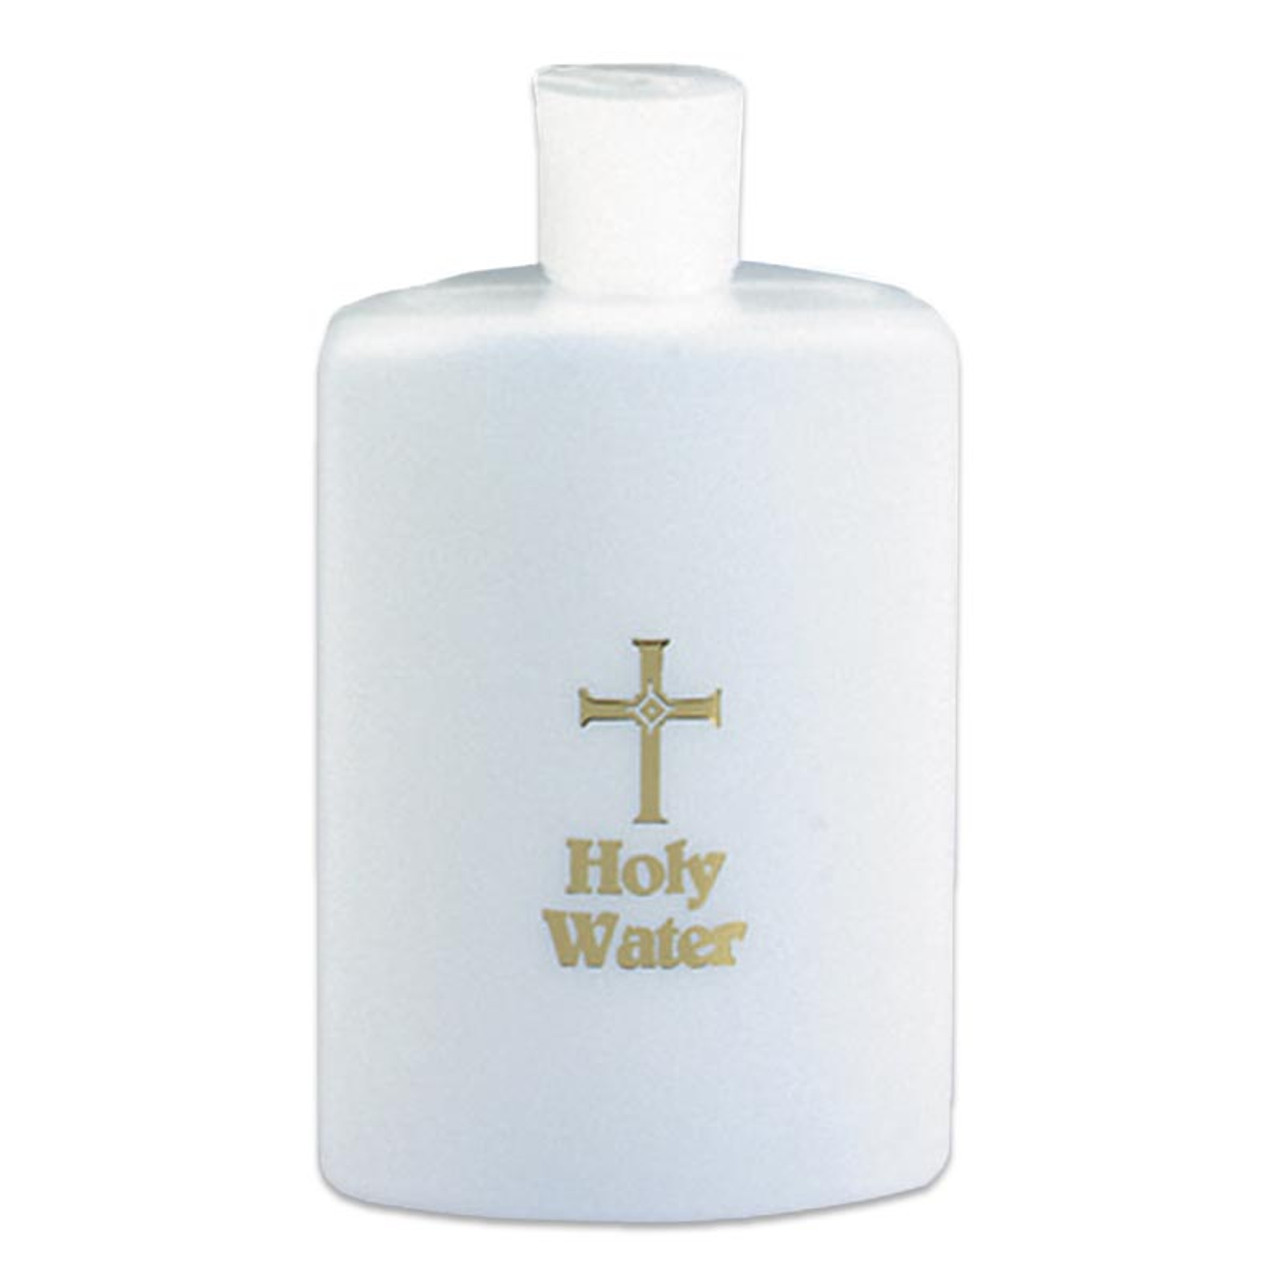 Plastic Bottle for Holy Water with Gold Cross, 2 oz.